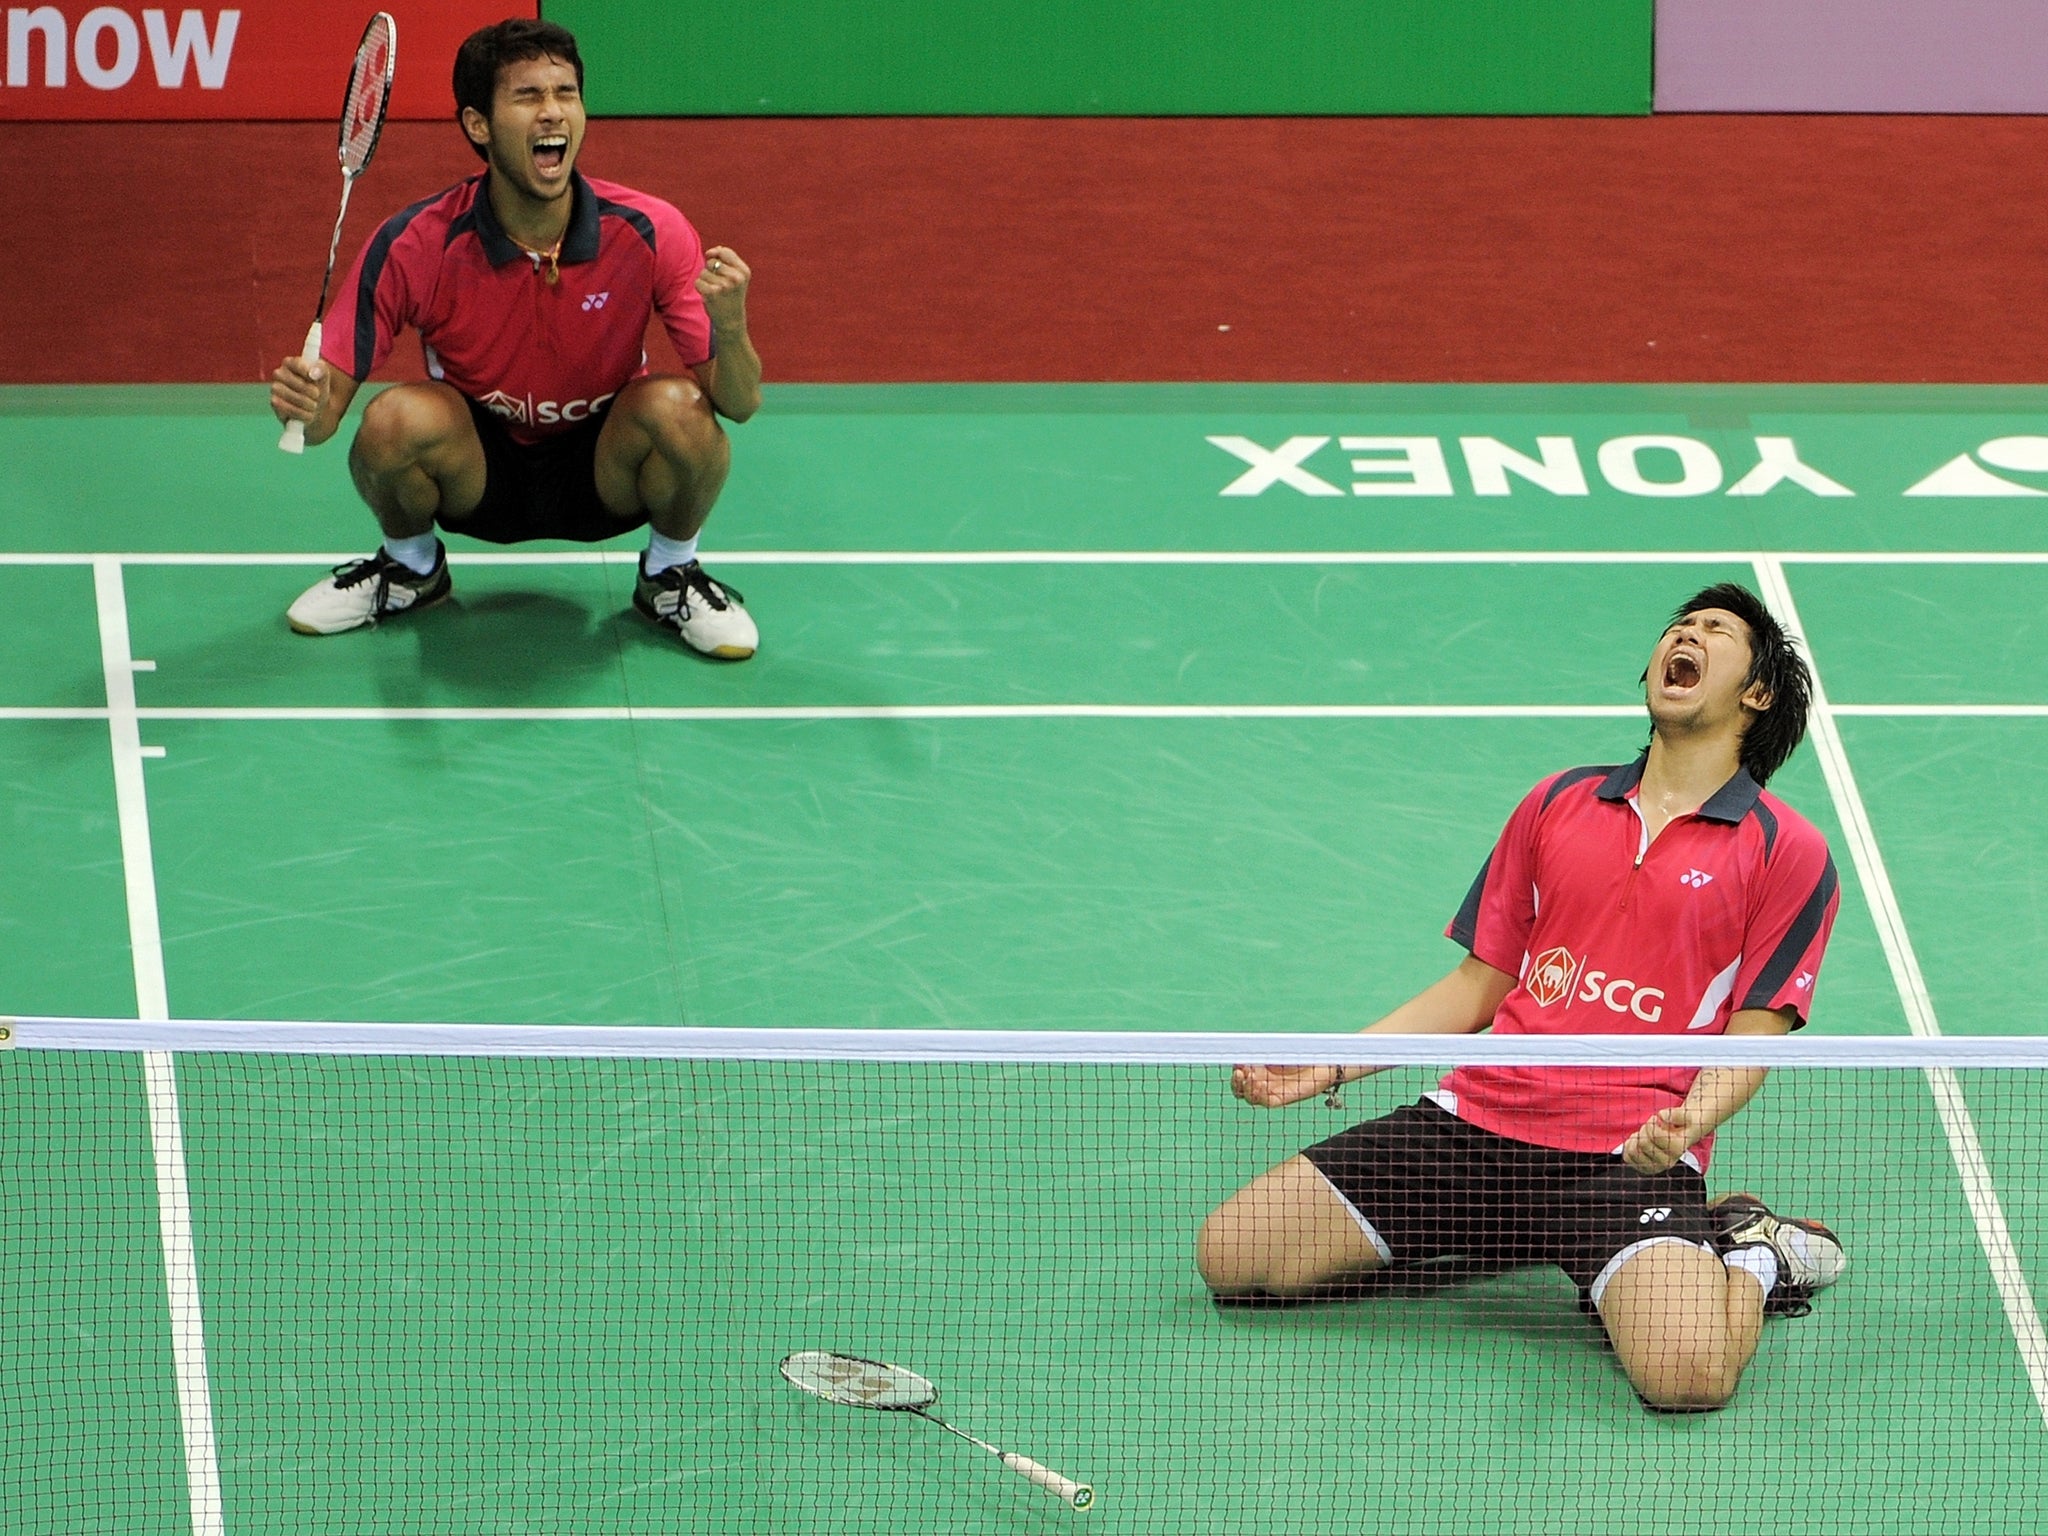 Badminton Bizarre fight breaks out between London 2012 partners at the Canada Open The Independent The Independent